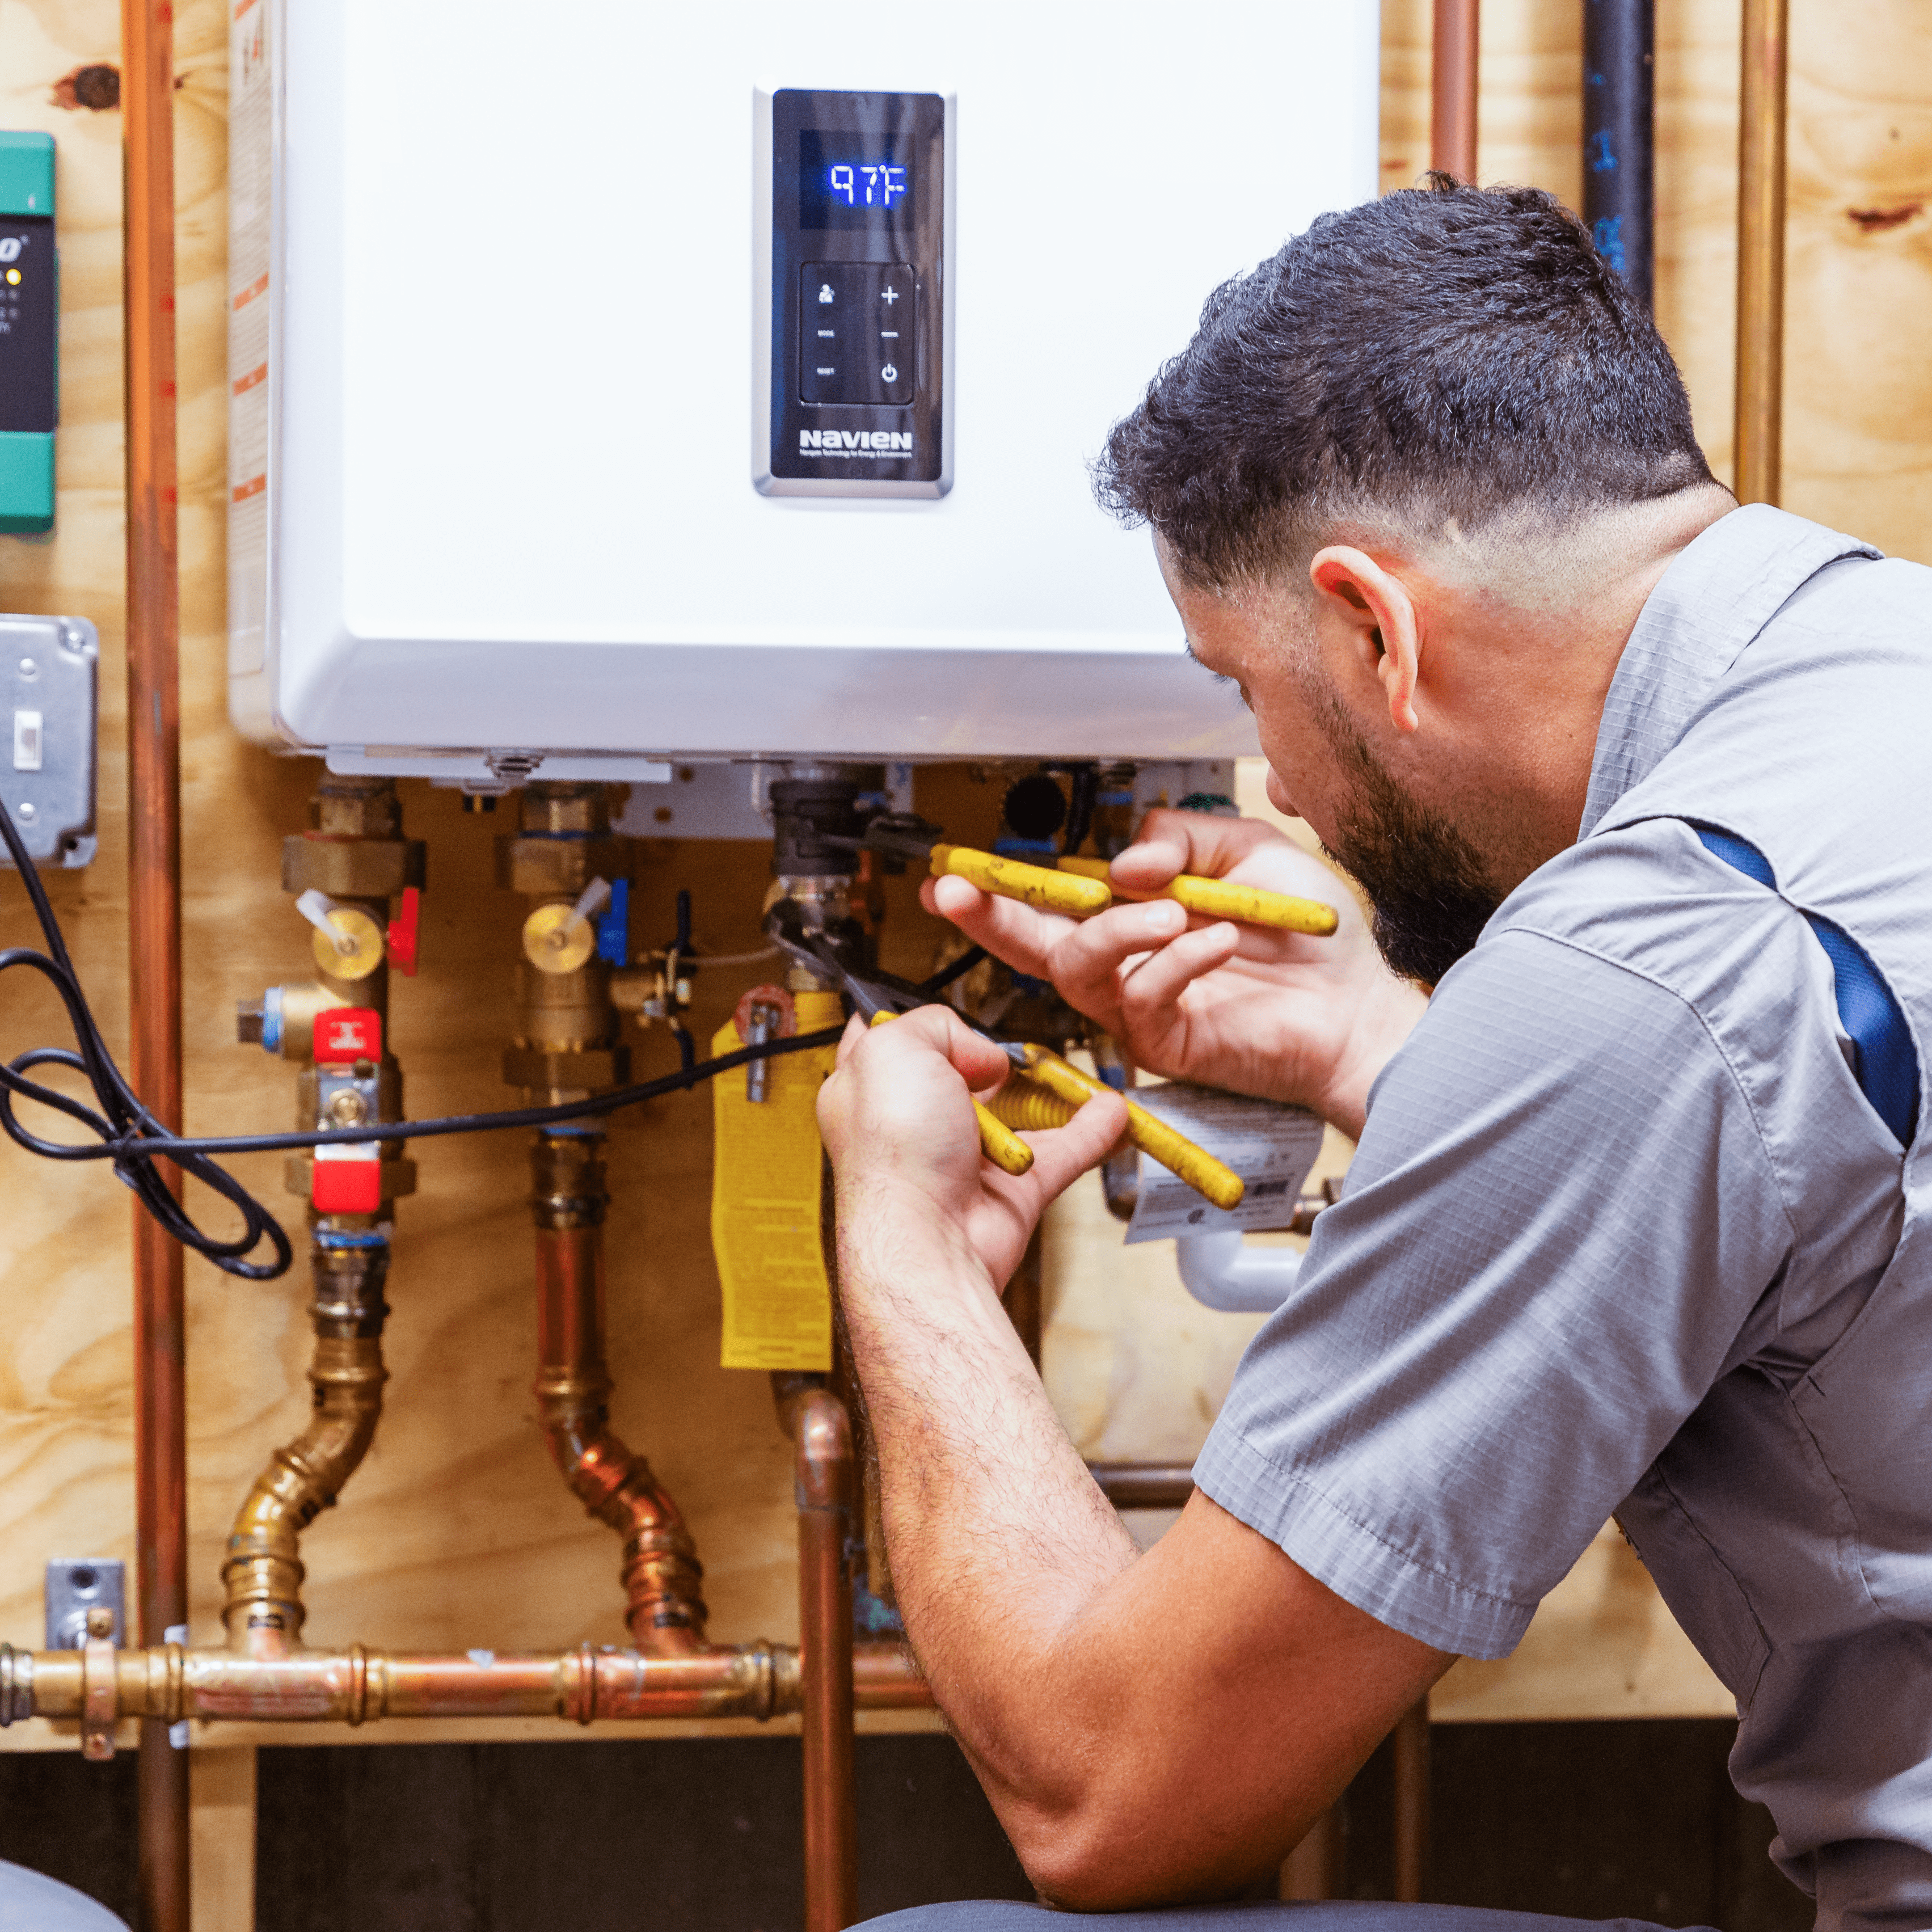 Technician working on a install water heater